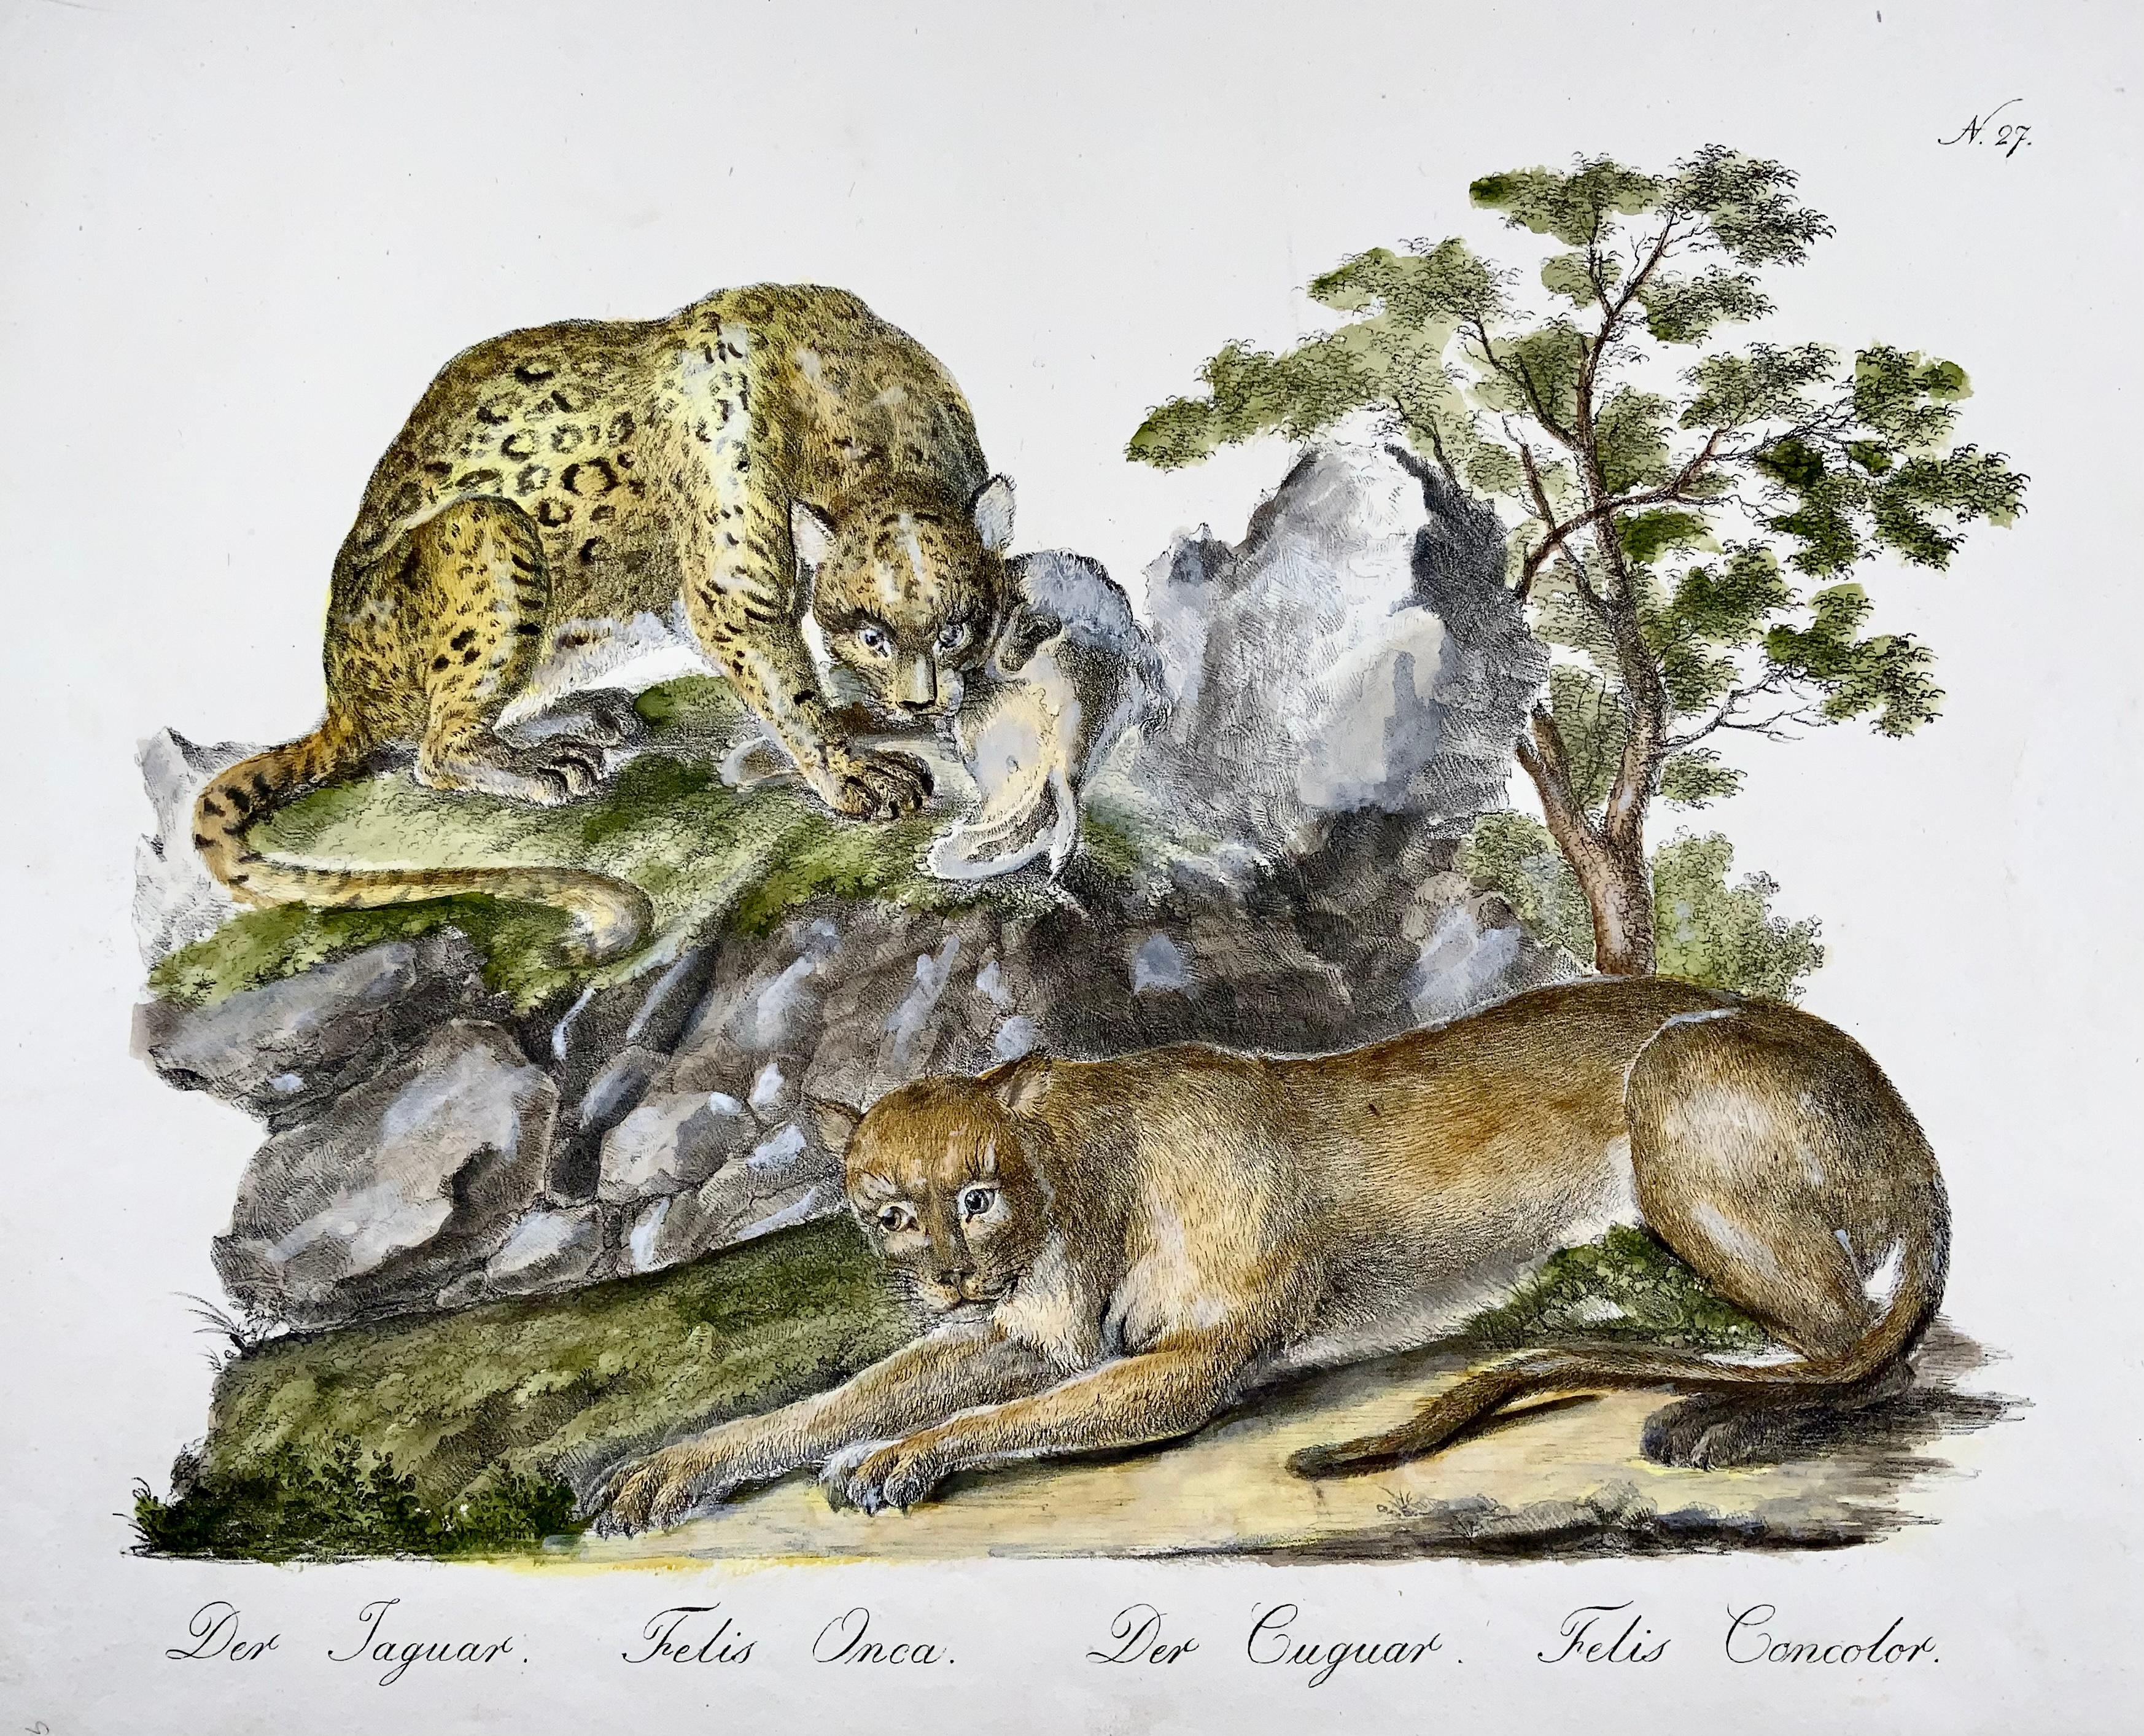 Landmark stone lithograph of large size and issued in the ‘Incunabula’ period of stone lithography prior to 1820. Print on fine Ziegler paper.

Extremely rare.

Hand colored stone lithograph by Carl Joseph Brodtmann from his extremely rare